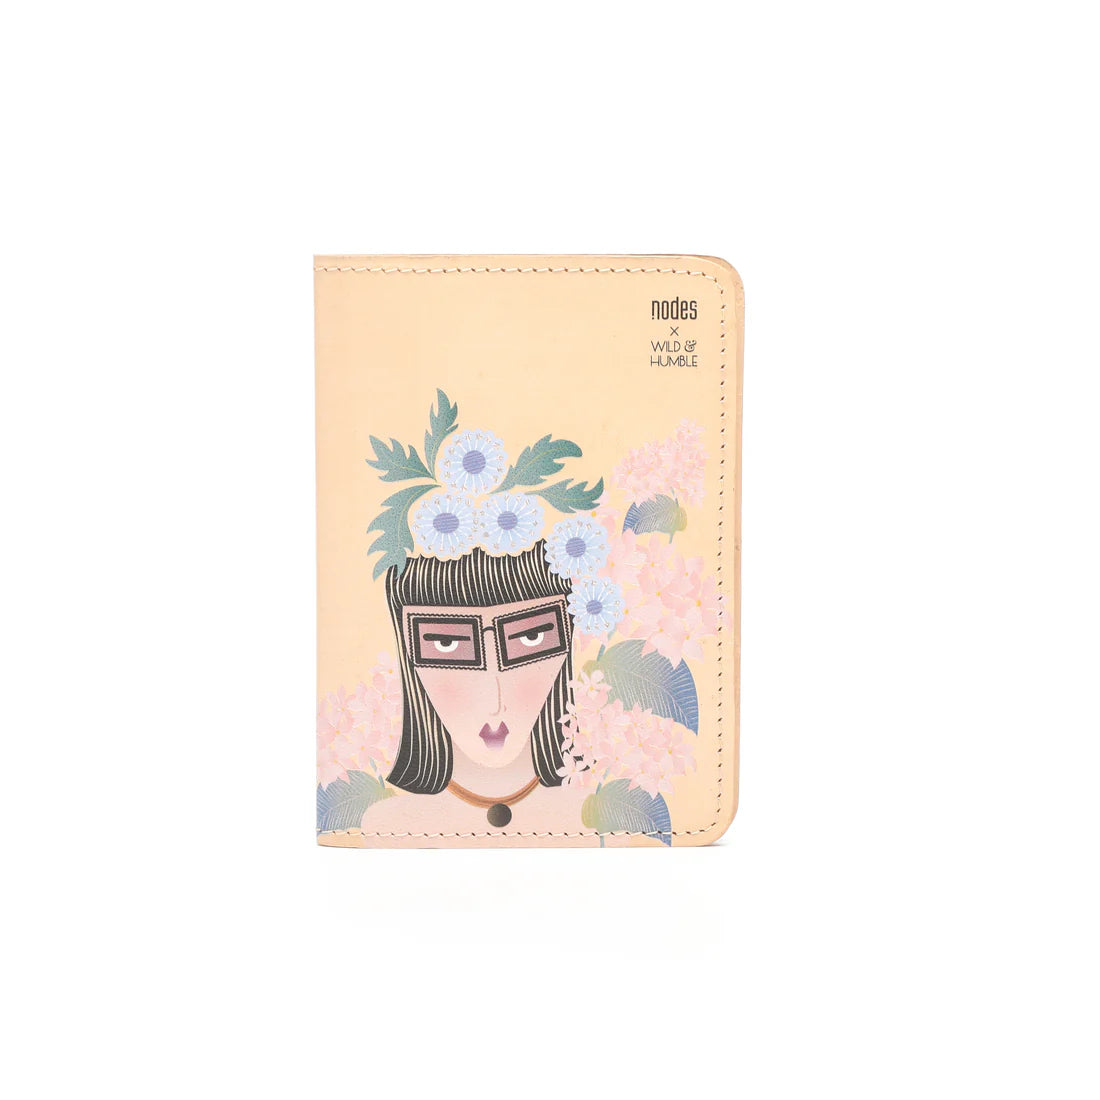 Front view of the passport cover.